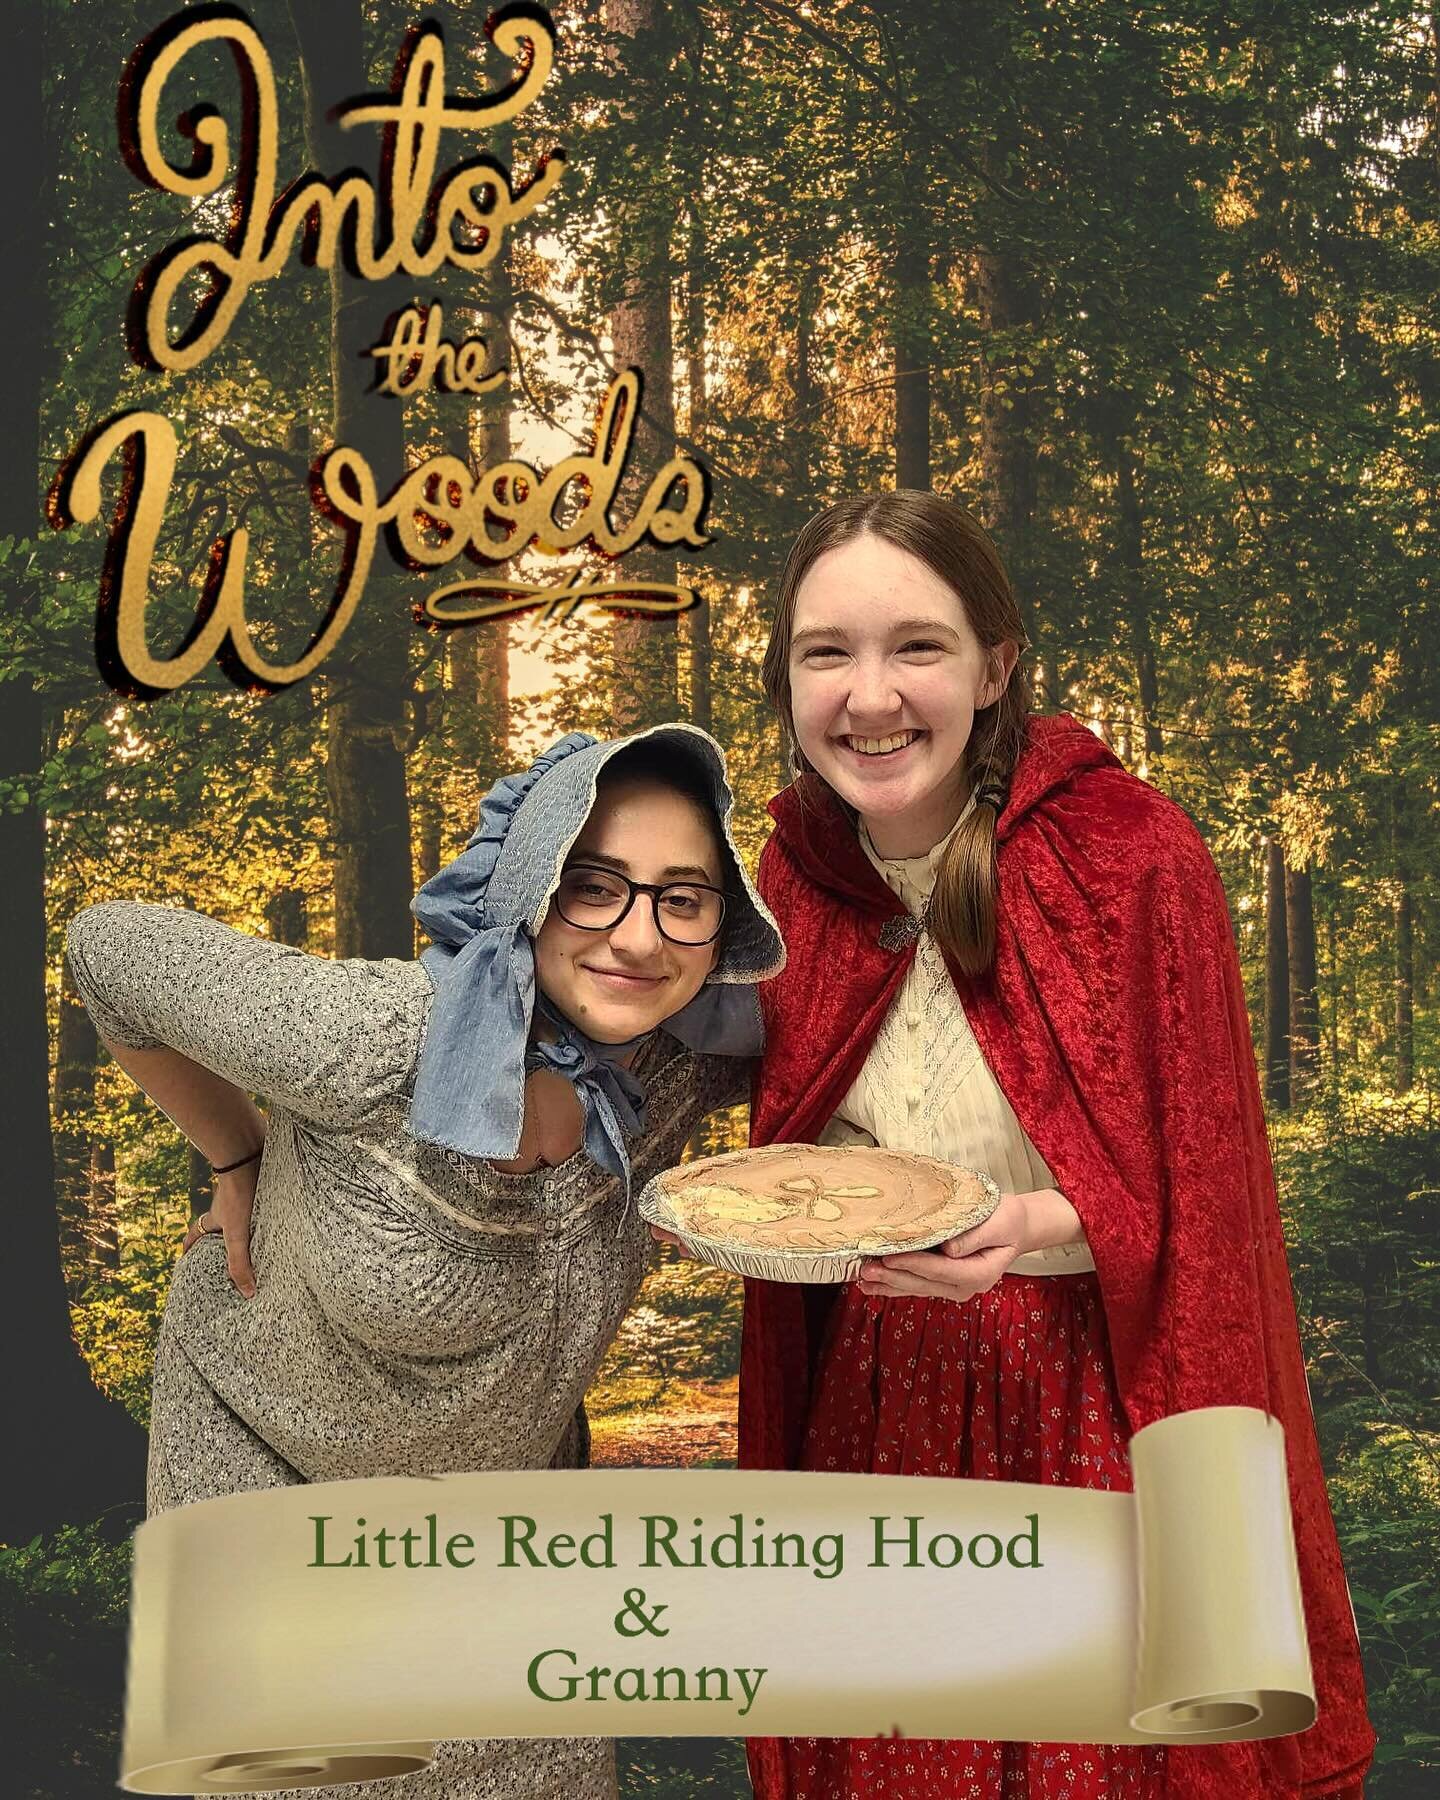 Did Little Red actually save some sweets for Granny this time?? Buy your tickets to see Into the Woods NOW! Link in our bio!!!